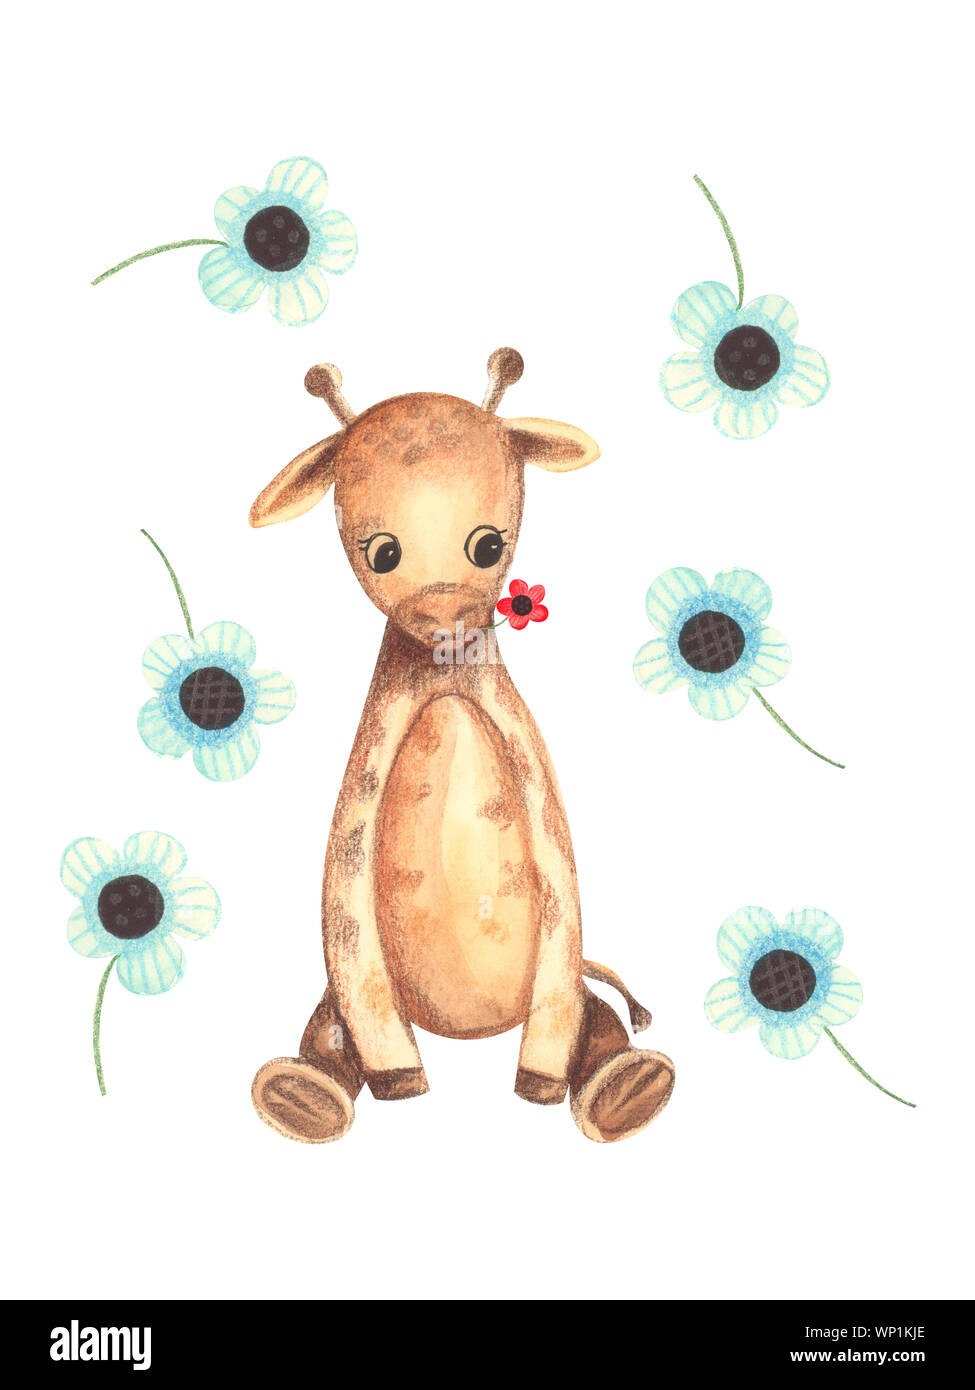 Illustration of color watercolor animal character giraffe sitting among flowers on a white isolated background. Stock Photo